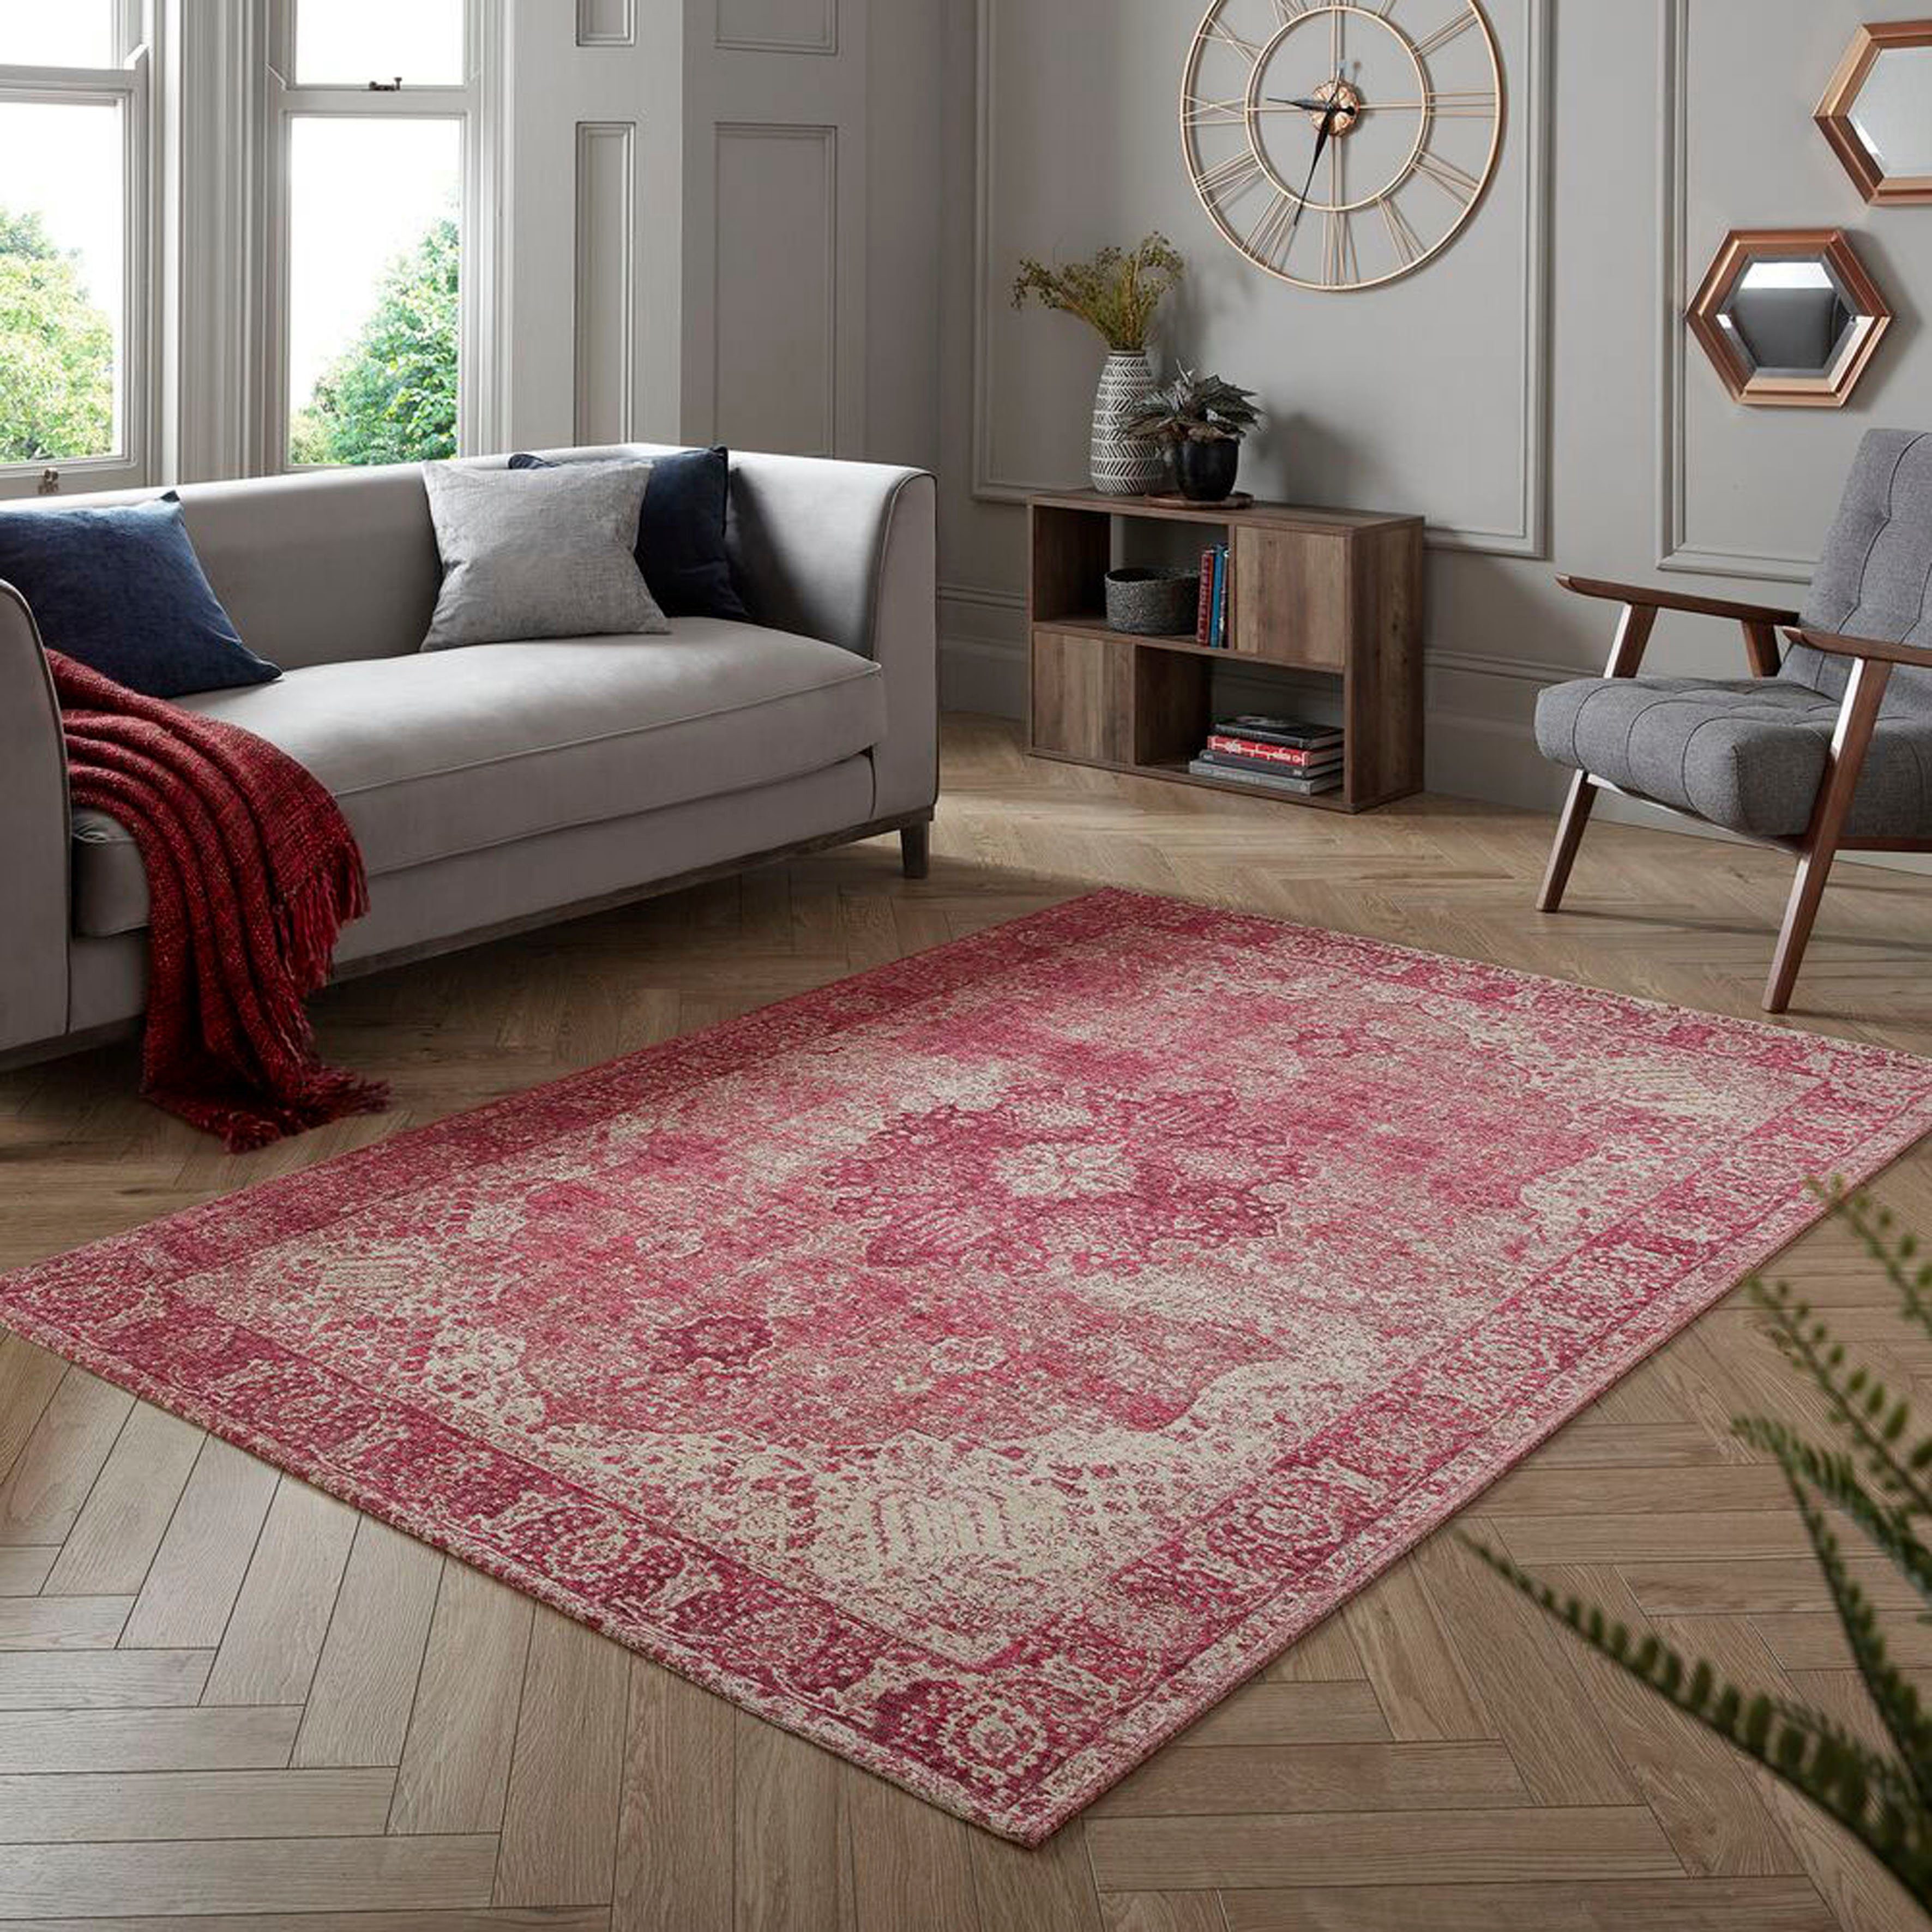 rot mm, Antique, Teppich RUGS, rechteckig, 4 Höhe: FLAIR Vintage-Muster